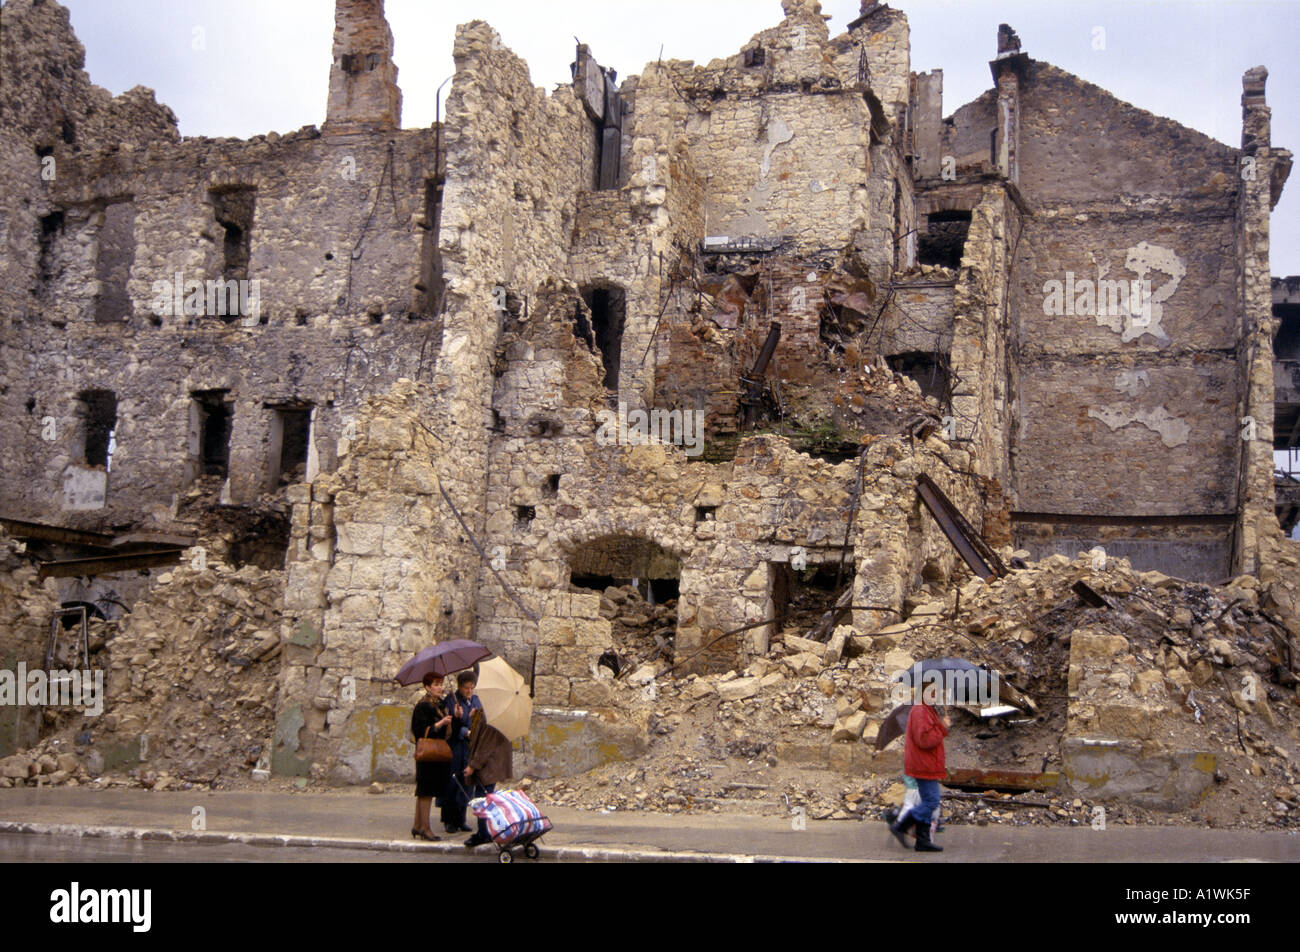 THREE WOMEN STANDING HOLDING UMBRELLAS TALKING ON THE STREET BESIDE THE REMAINS OF SEVERAL DESTROYED BUILDINGS IN MOSTAR 1994 Stock Photo